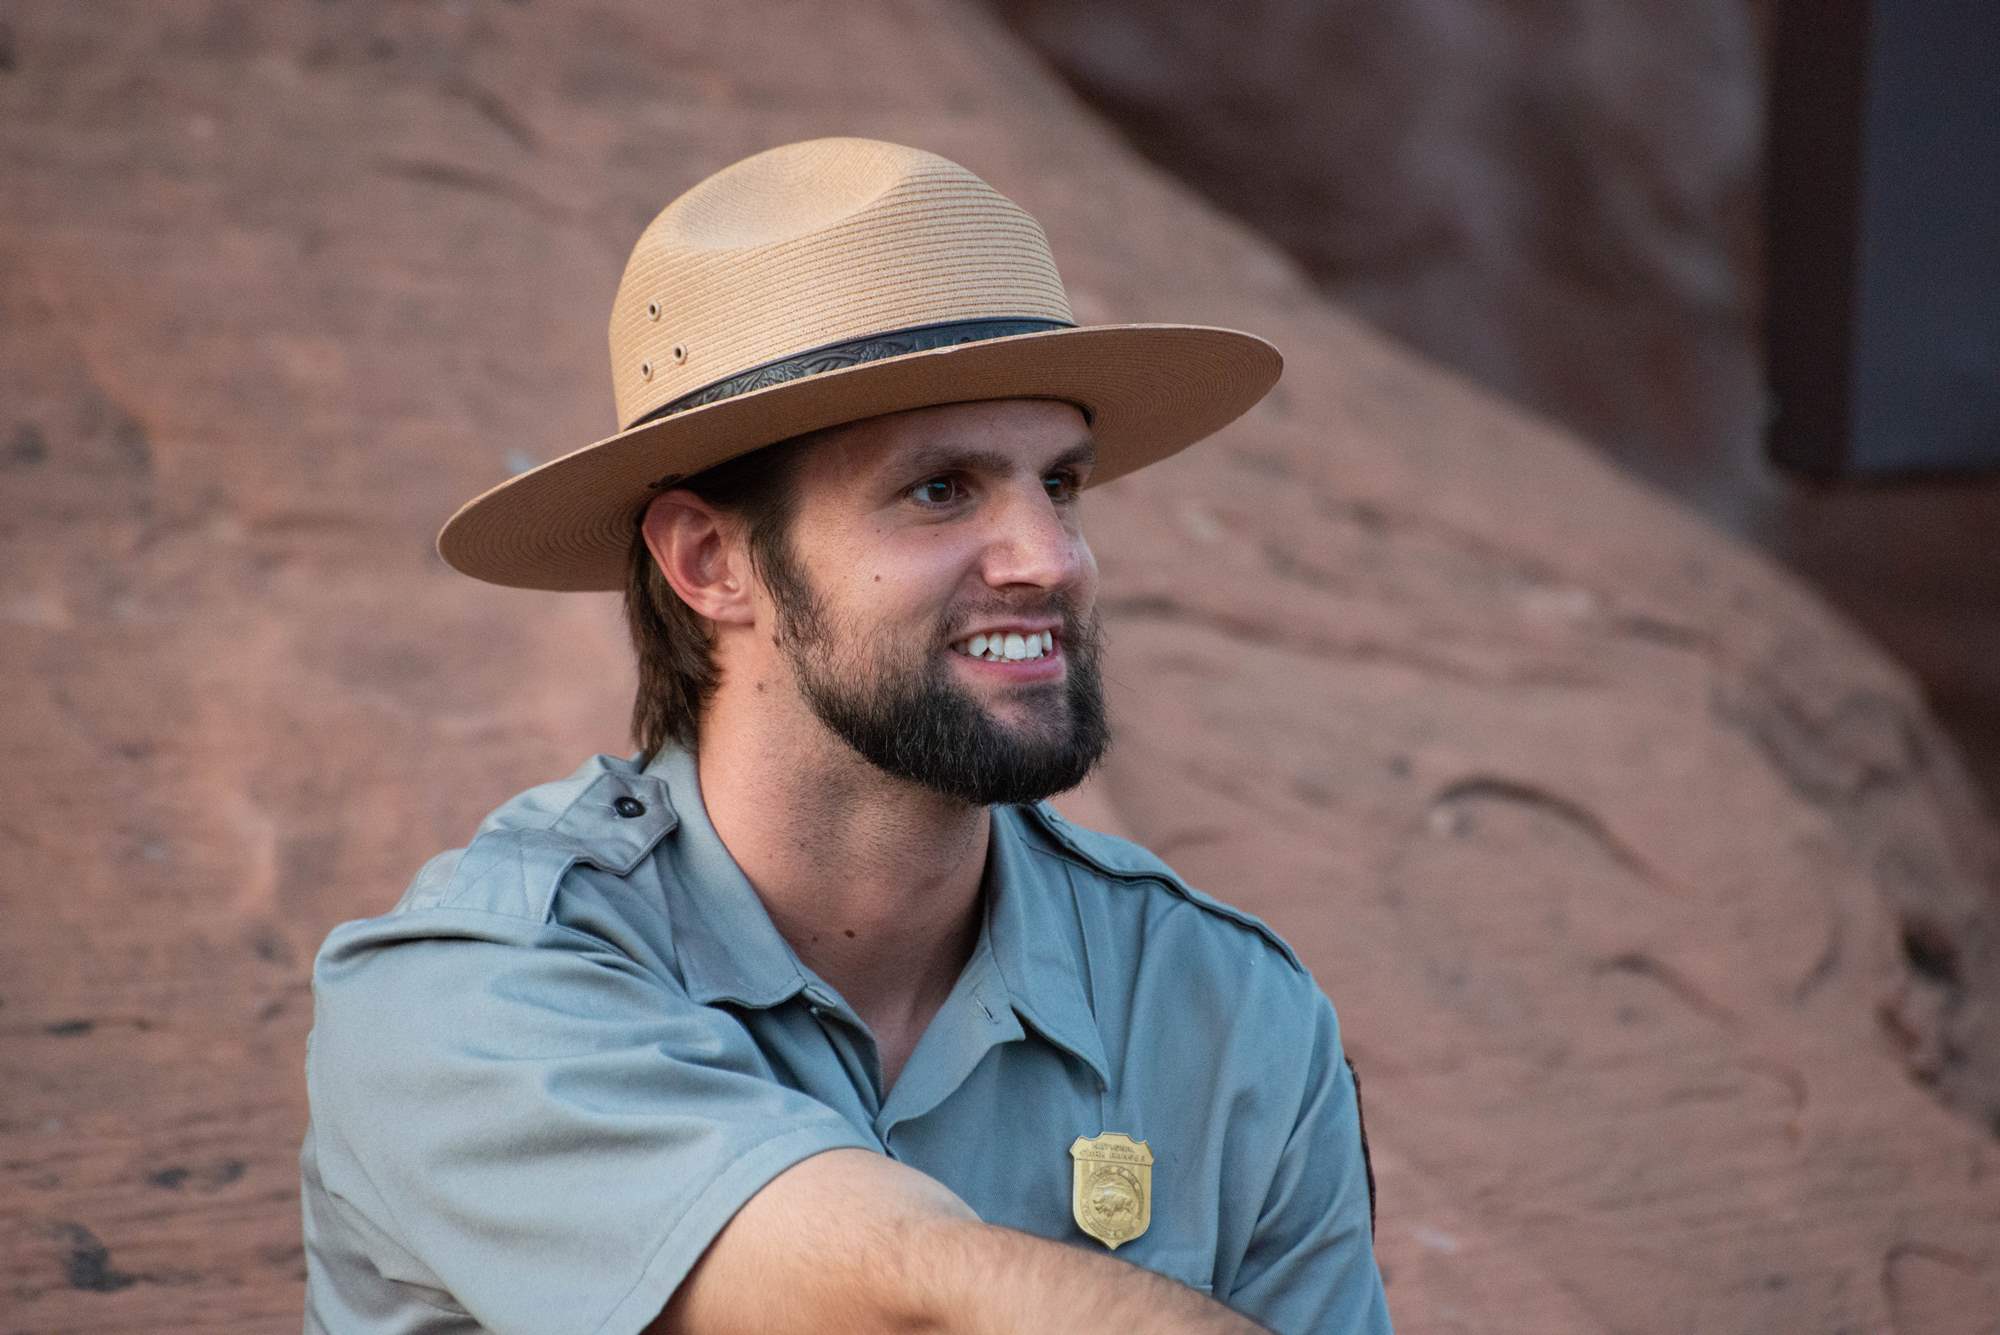 Martin Tow wears a broad brim hat and NPS uniform with shield-shaped badge bearing a bison pinned to his shirt.